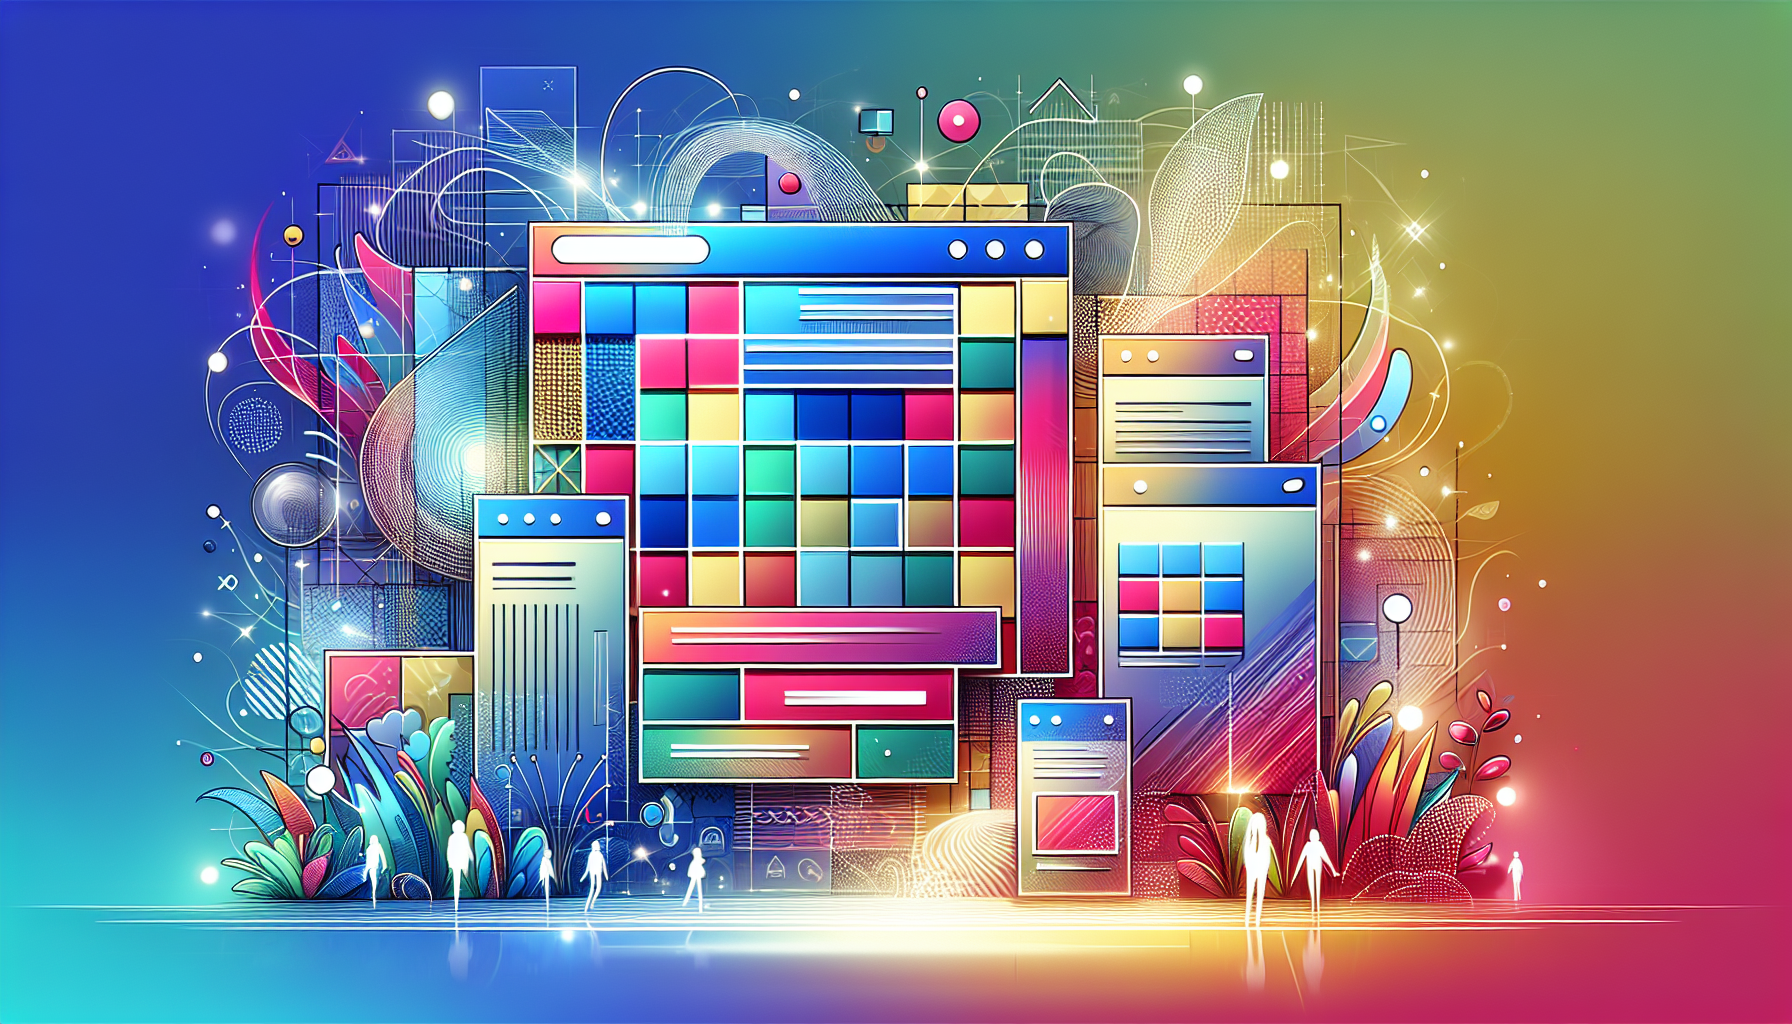 Illustration of a modern website design with vibrant colors and user-friendly layout